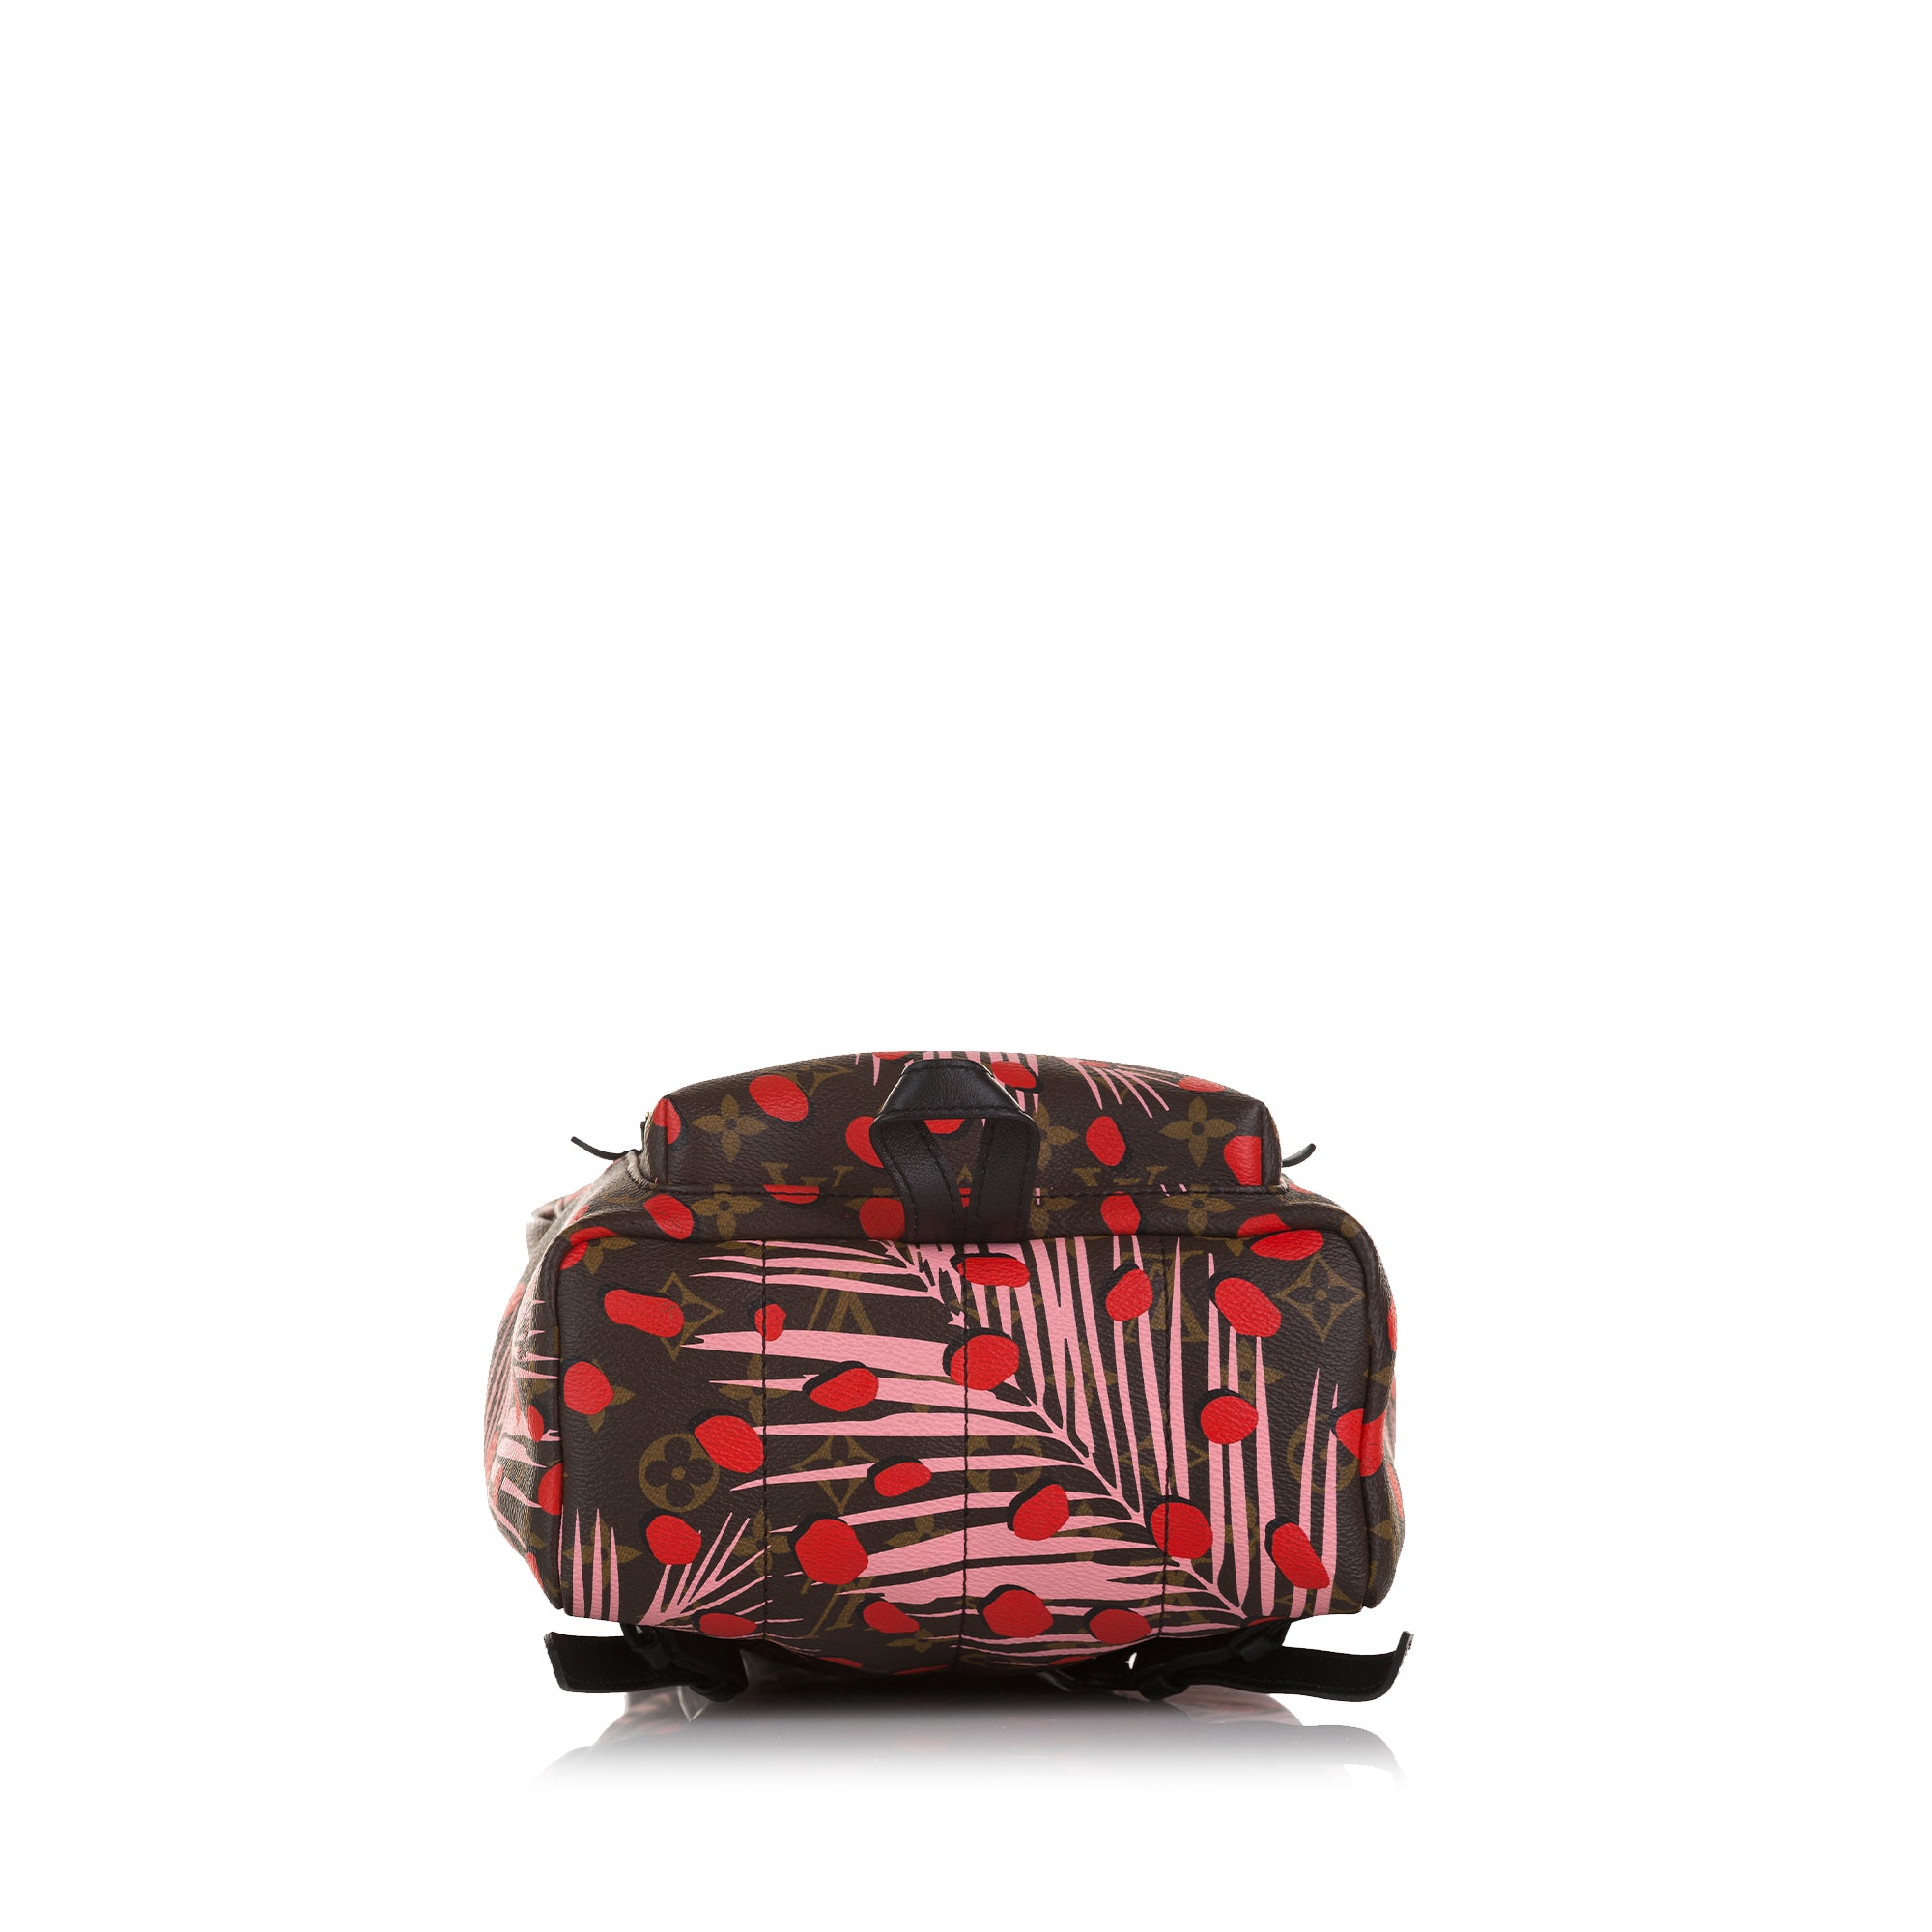 louis vuitton black and red backpack